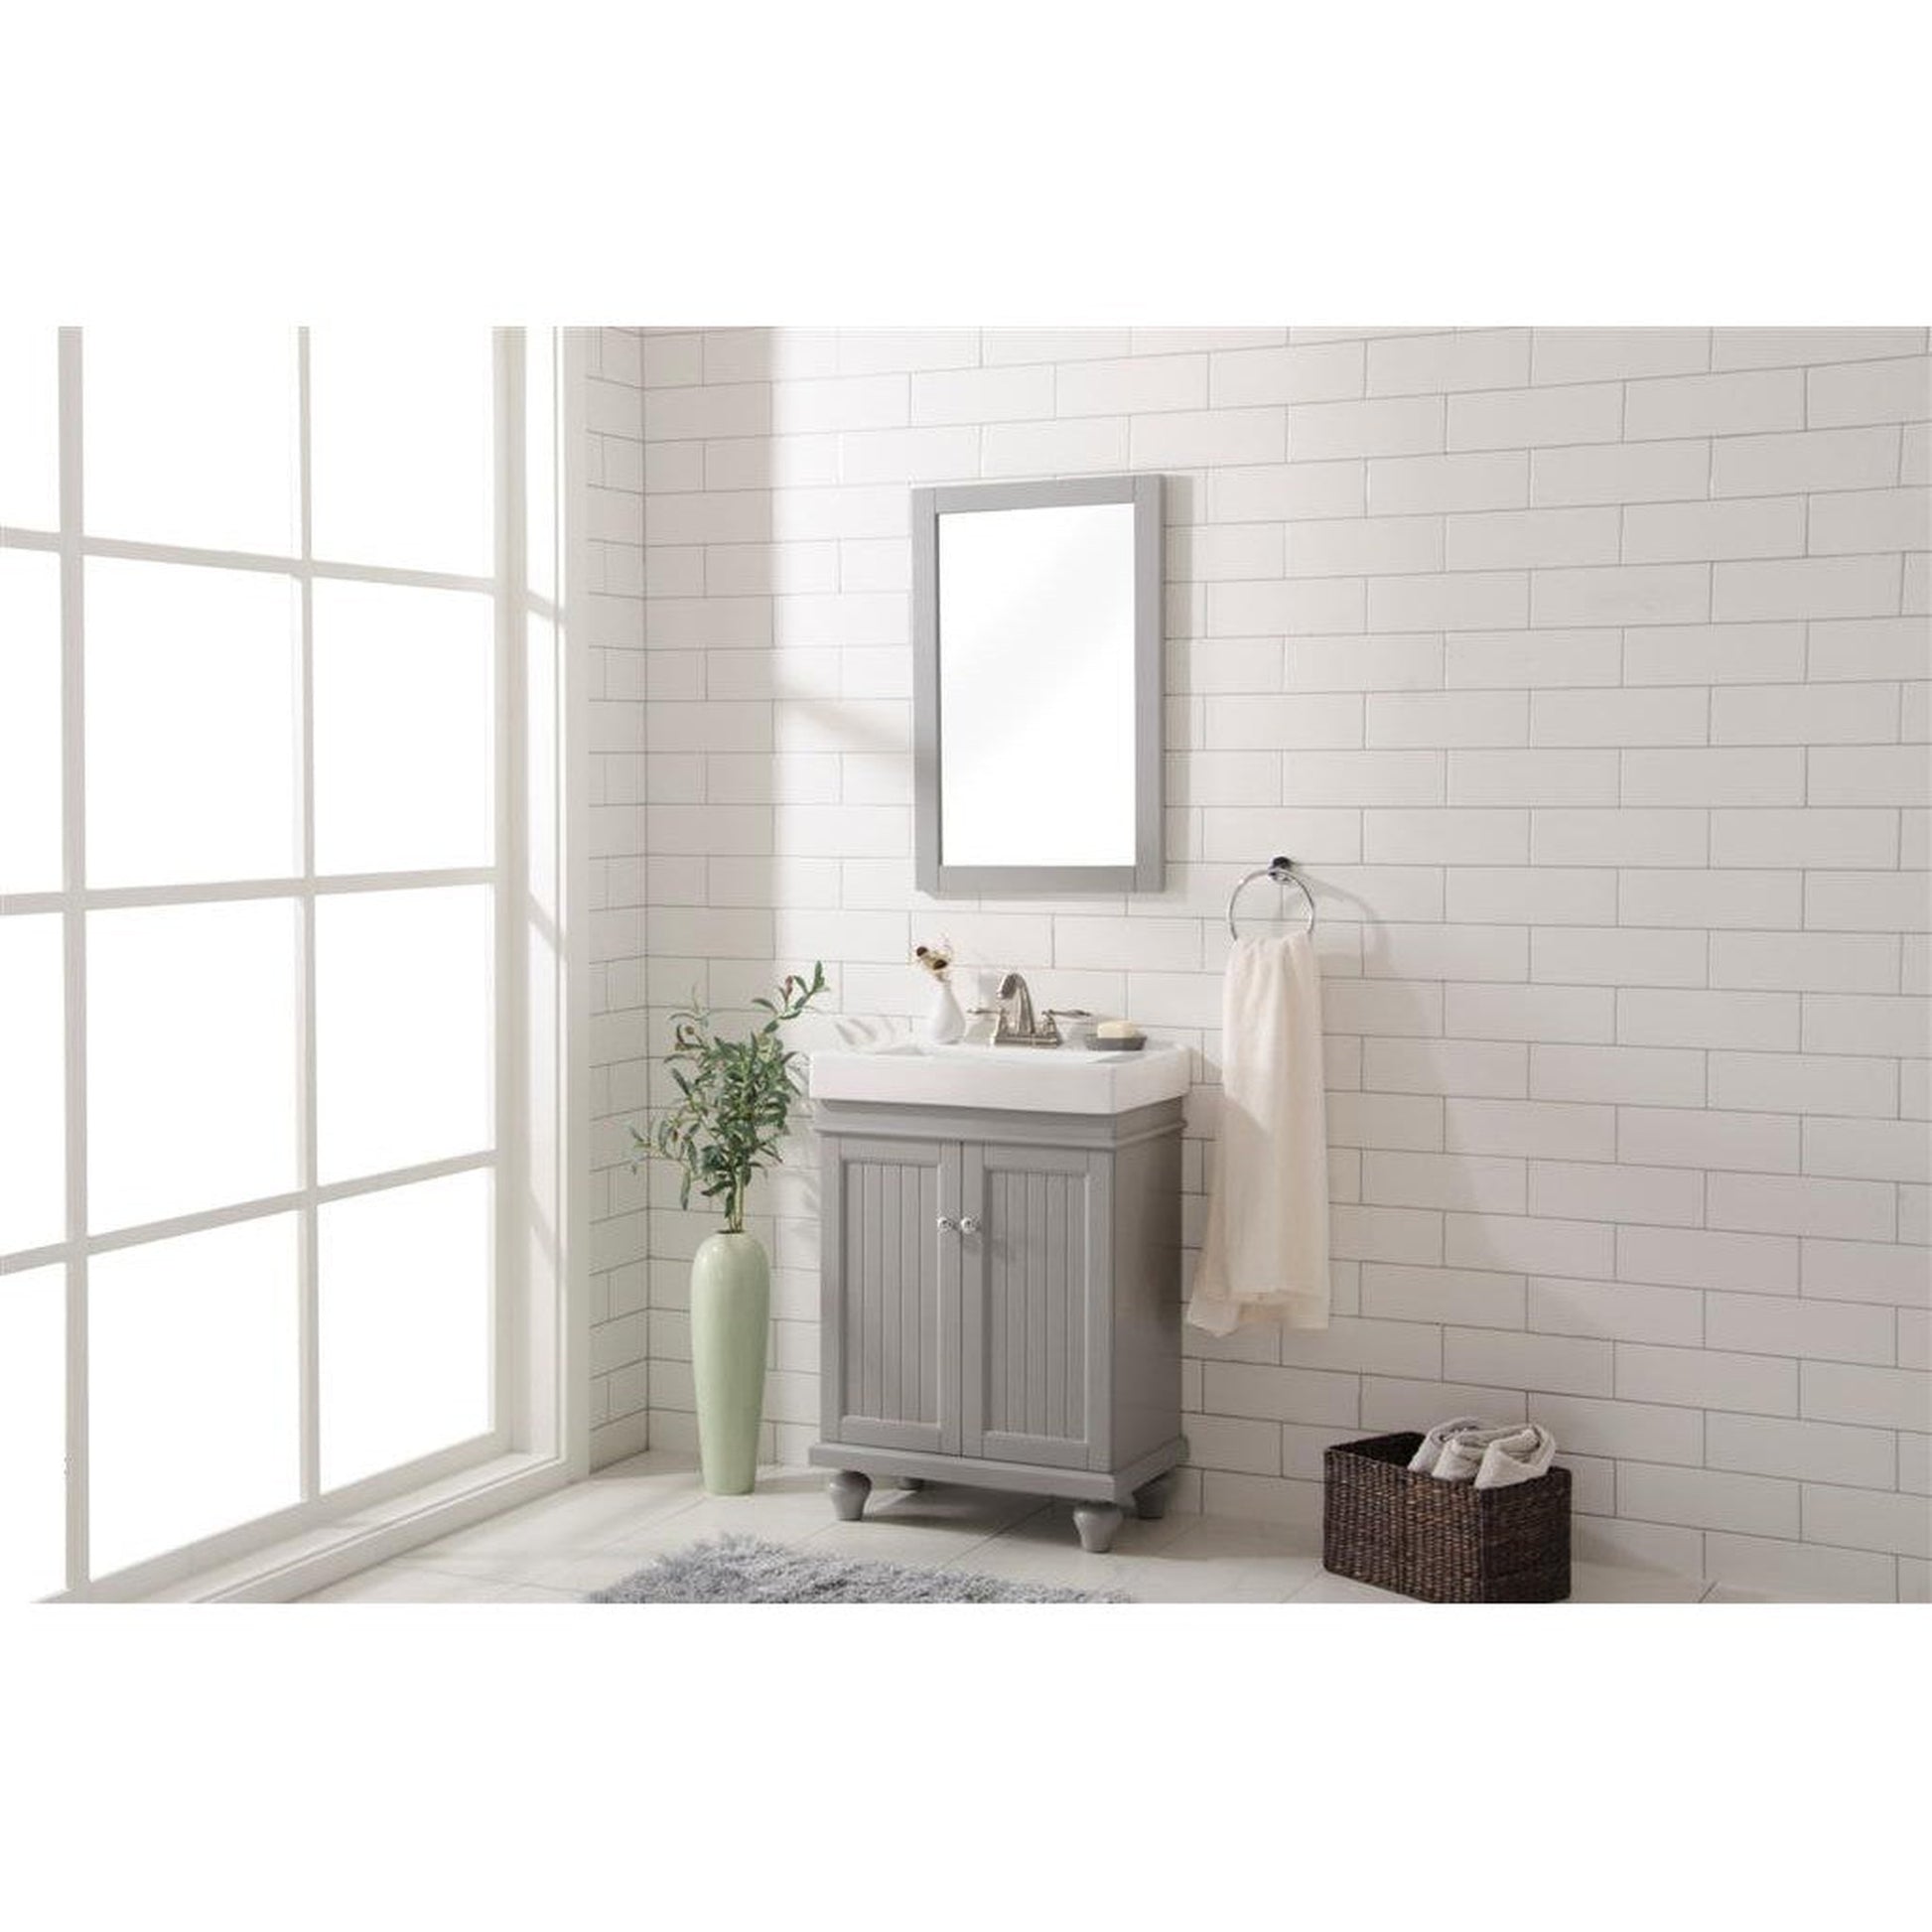 Legion Furniture WLF9324 24" Gray Freestanding Vanity Cabinet With White Ceramic Top and Sink